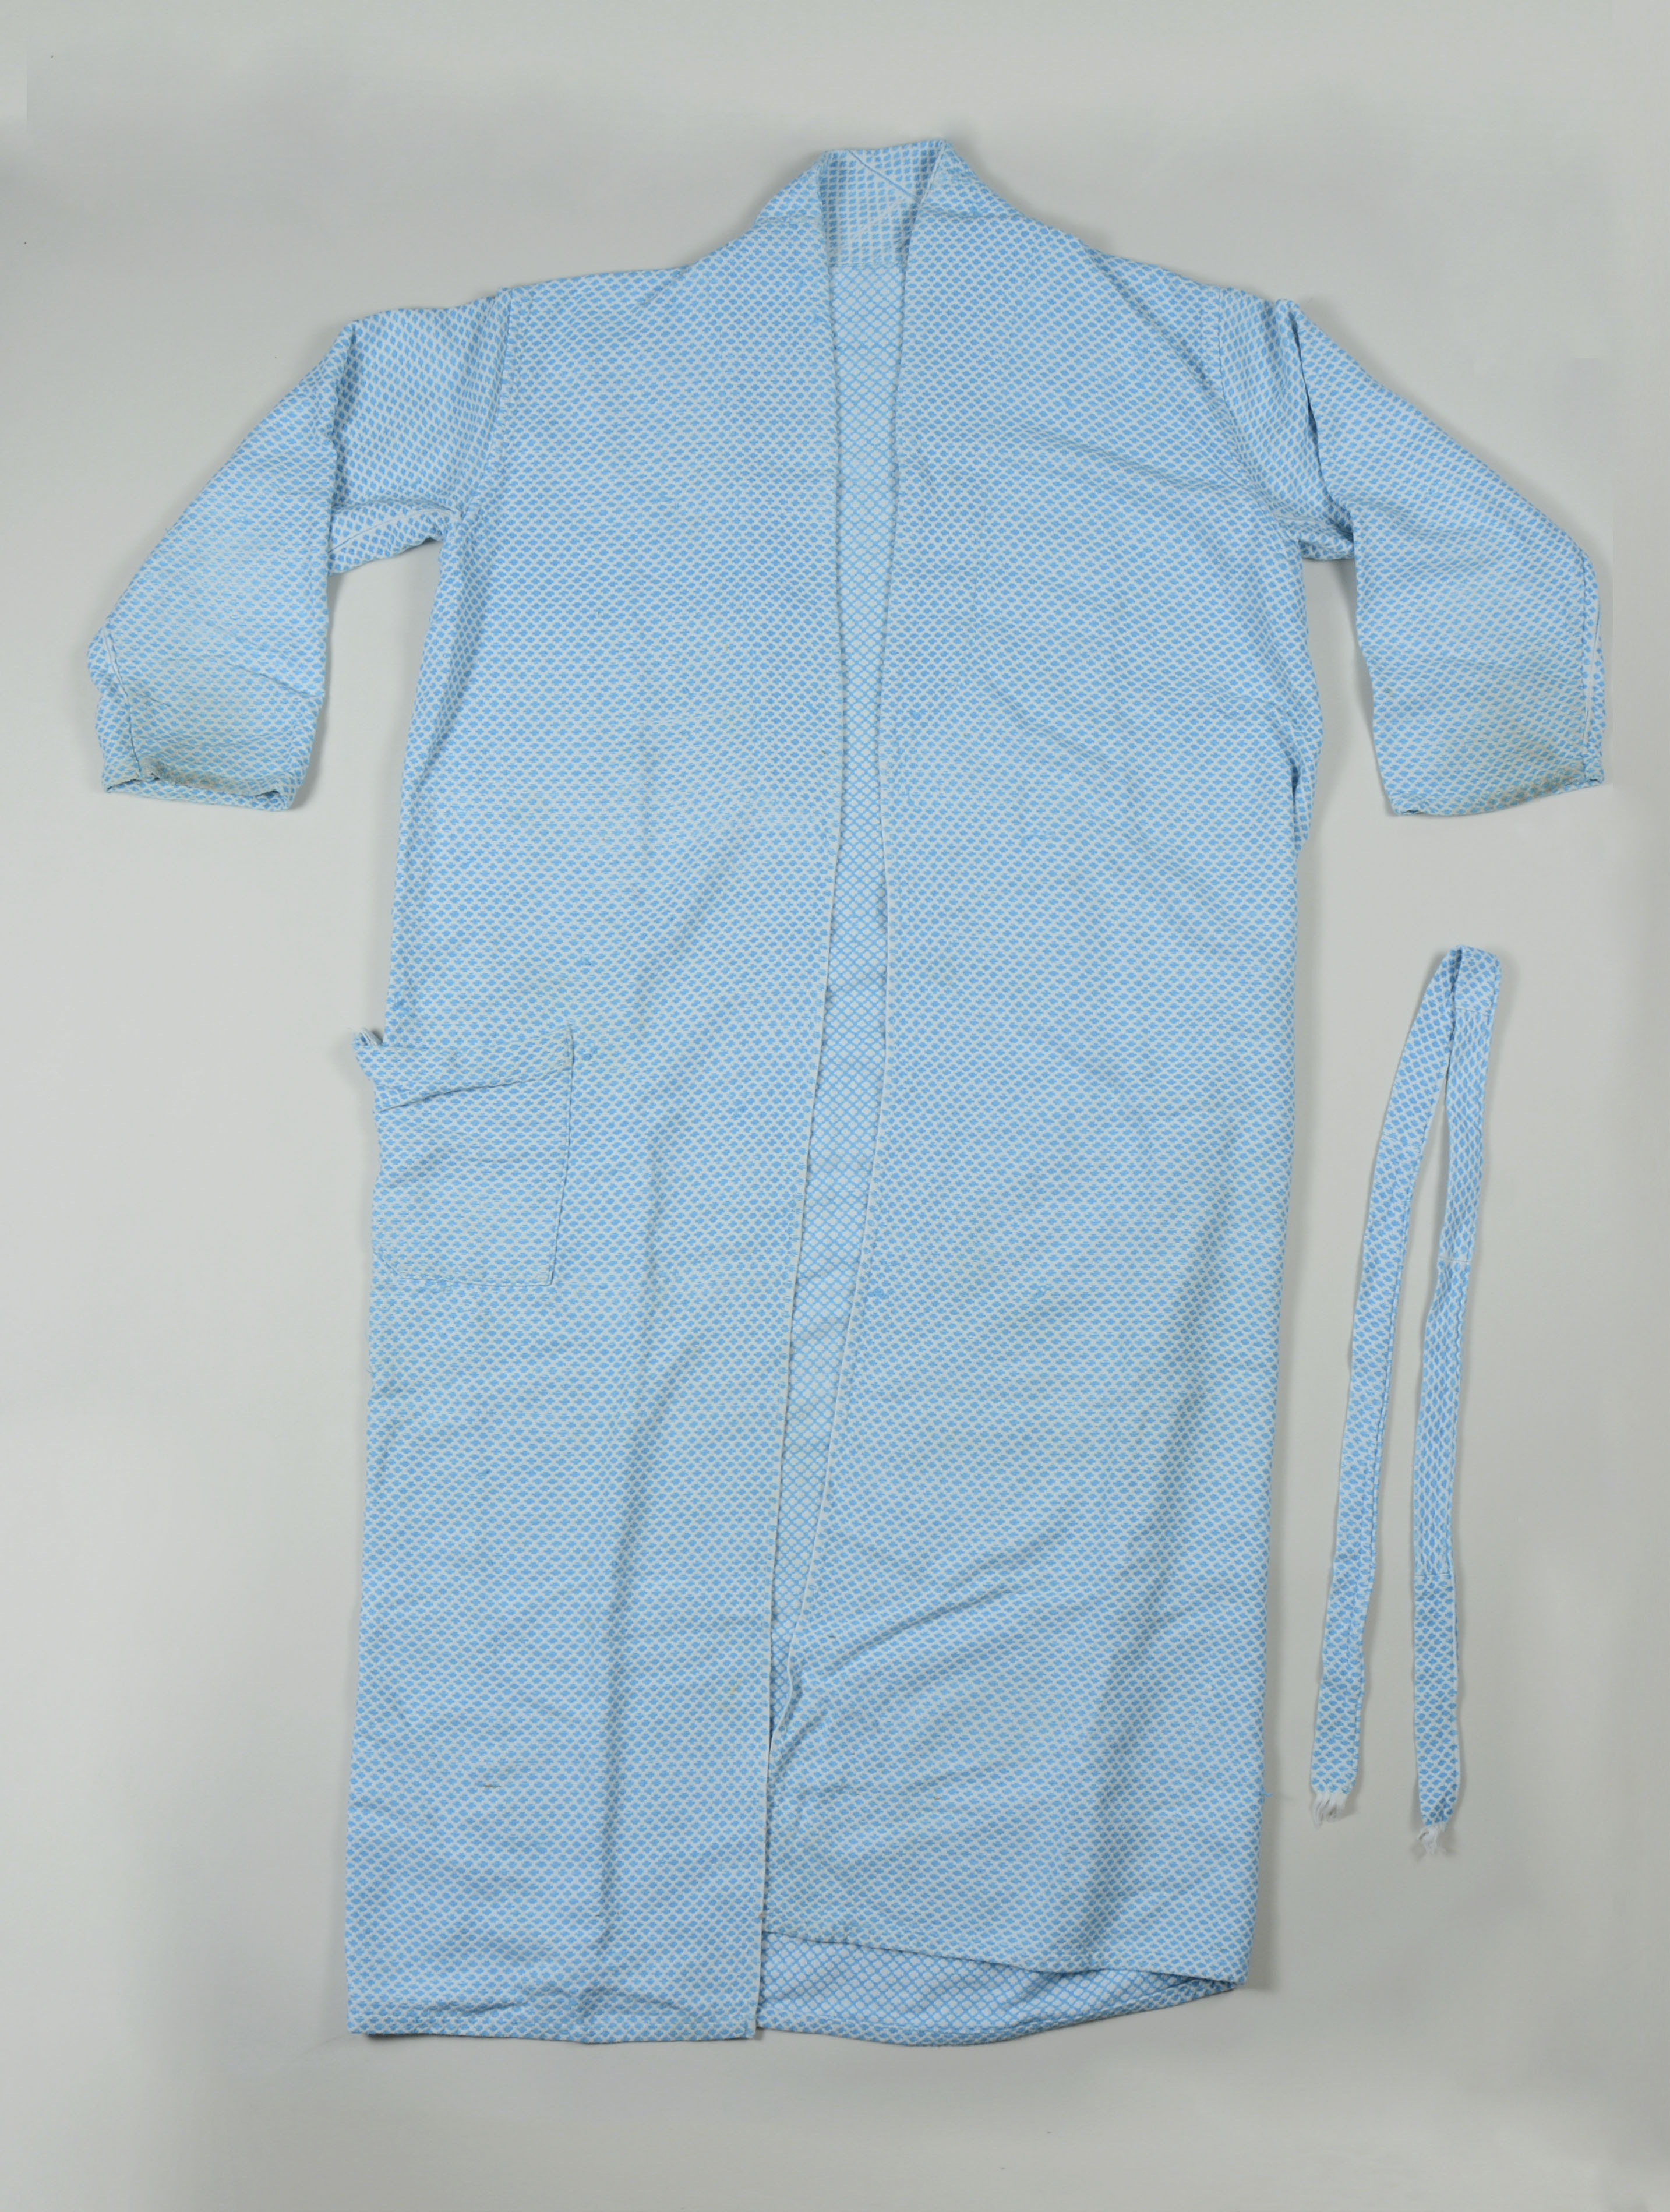 Abel Iloko (Hand woven) bath robe owned by Edwin P. Abaya- full.  Made in the 1960s and given to Edwin by his mother, who had the robe custom made for him. It was made in Vigan, Ilocos Sur. He brought it with him when he came to the US in 1968. It is important to Edwinbecause hand woven clothing and other products are and have been a thriving industry in Ilocos Sur and he does not know if we have any examples of this work in our collection at the Field Museum. He wants to make sure they are represented. He says the design is slightlyunusual for the time, as they were usually more geometric. He does not wear it anymore because he wants to preserve it. He says he is grateful that this project (Homeland Memories) exists for the people who came to the US from the Philippines and wants to contribute these 2objects to show what his hometown is known for. Any views, findings, conclusions, or recommendations expressed in this story do not necessarily represent those of the National Endowment for the Humanities. (c) Field Museum of Natural History - CC BY-NC 4.0